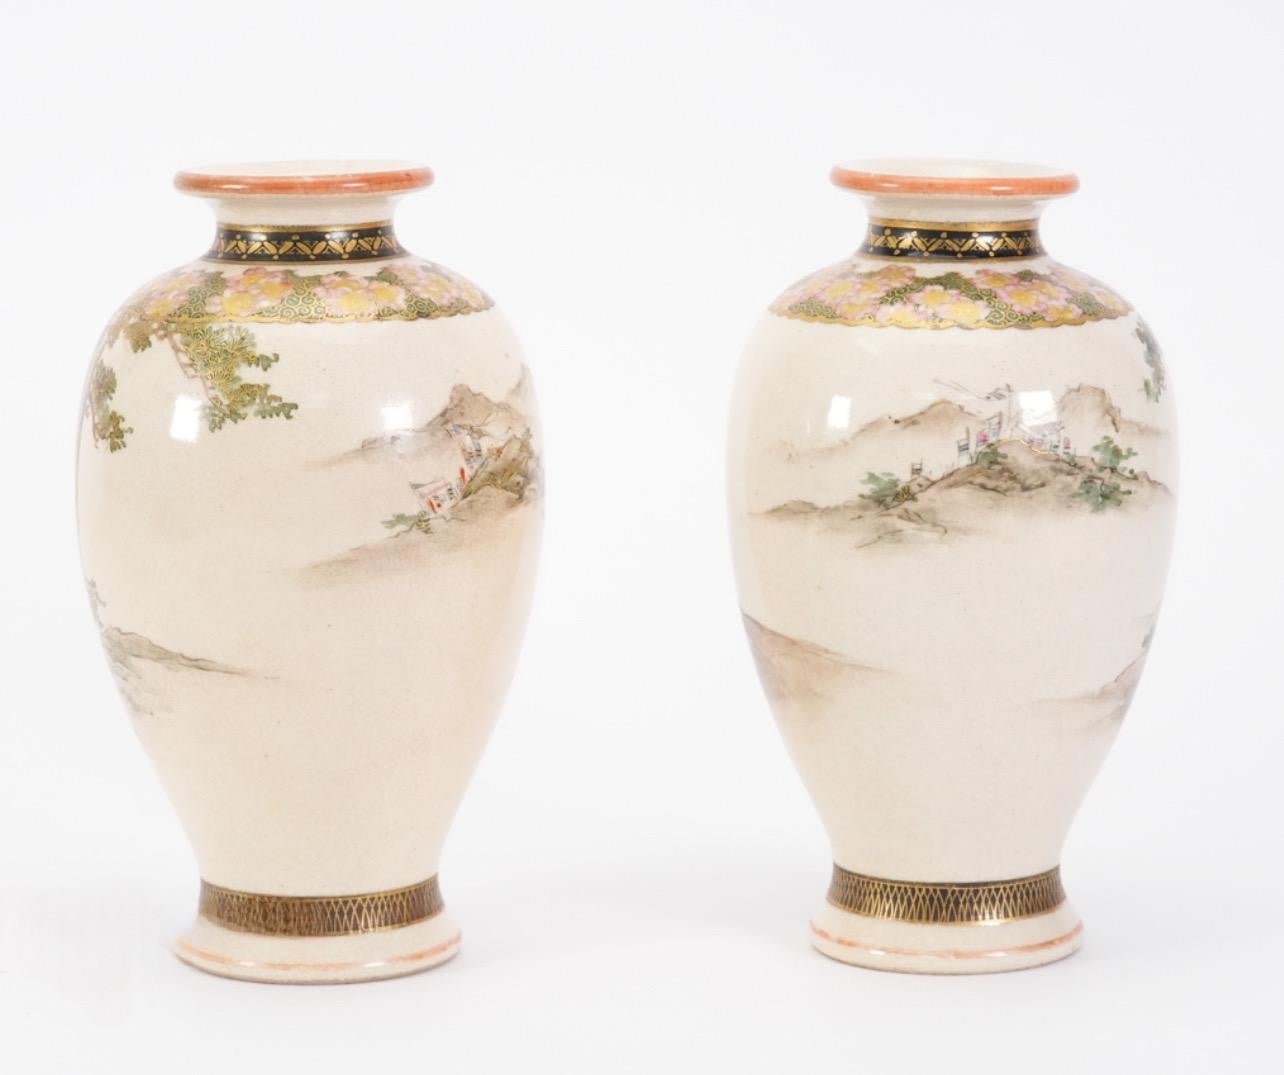 A Fine Pair of Japanese Antique Satsuma Vases Signed by Choshuzan 長州山. Meiji Era For Sale 1